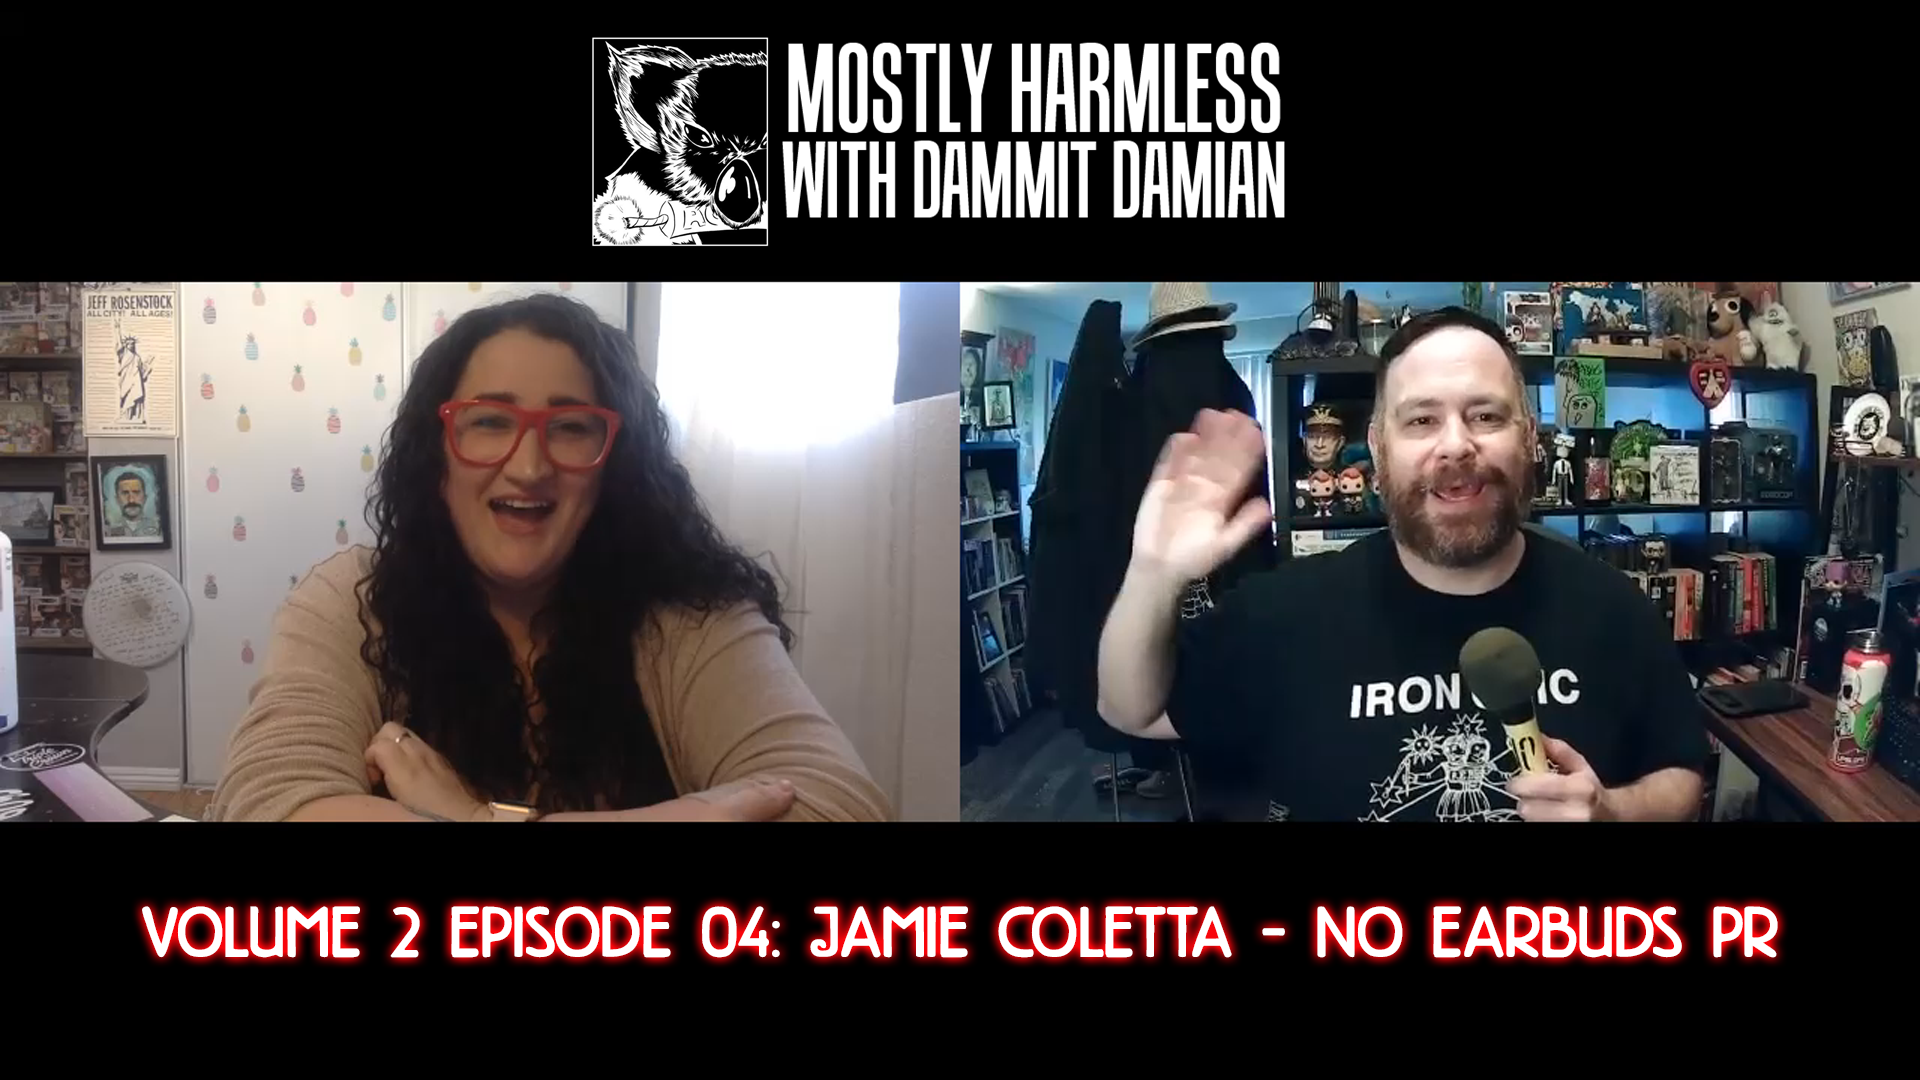 MHv2e04 – Music Publicist Jamie Coletta interview with the owner of No Earbuds PR (Has worked with AJJ, Jeff Rosenstock, Wonder Years, Ratboys)